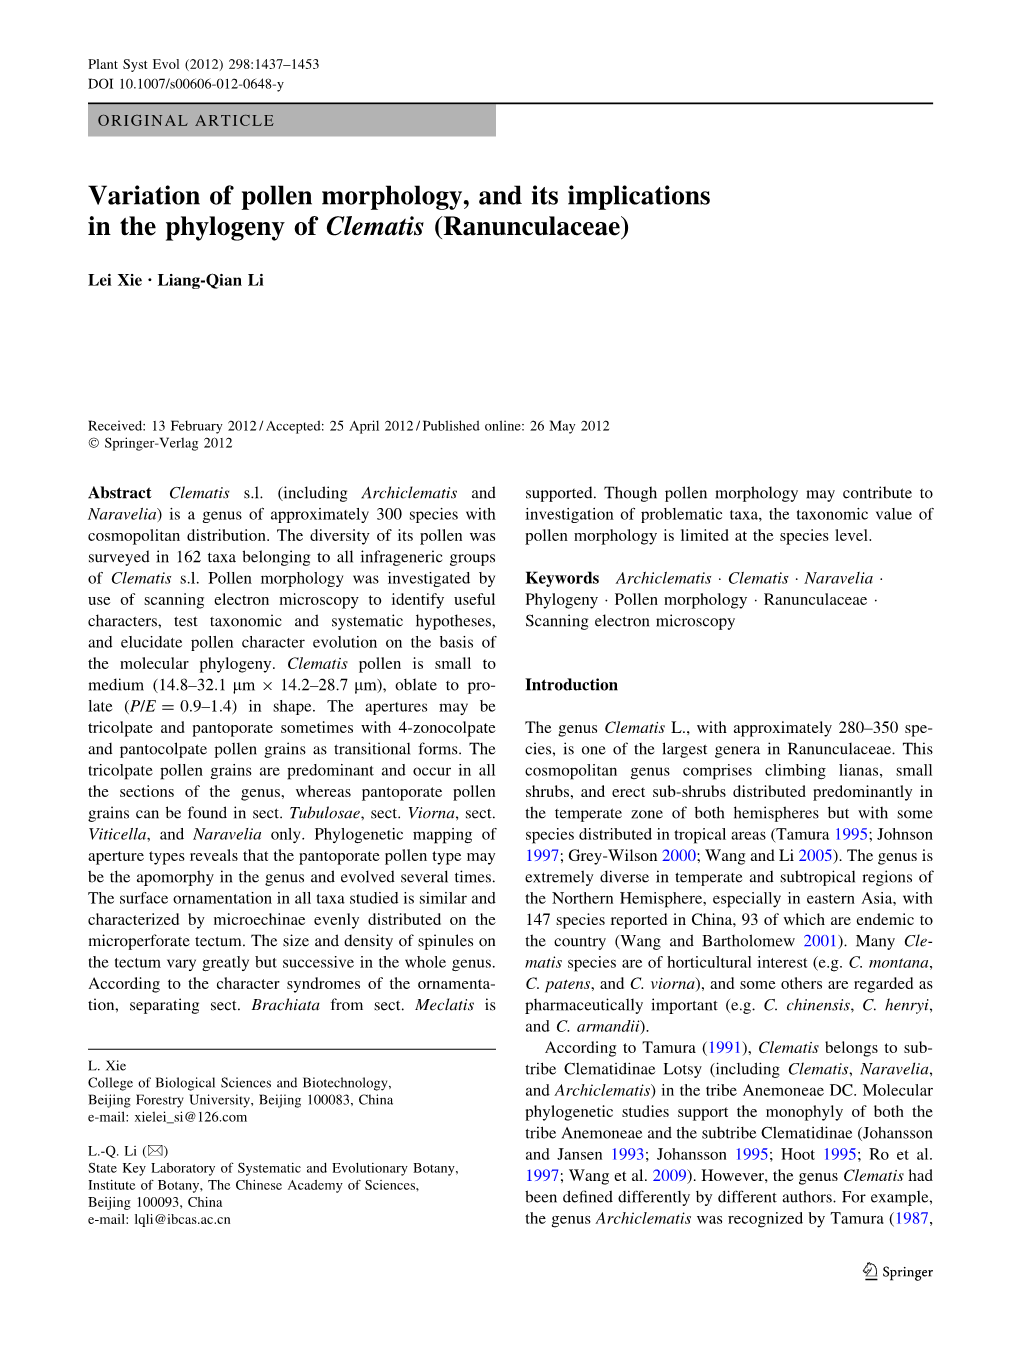 Variation of Pollen Morphology, and Its Implications in the Phylogeny of Clematis (Ranunculaceae)